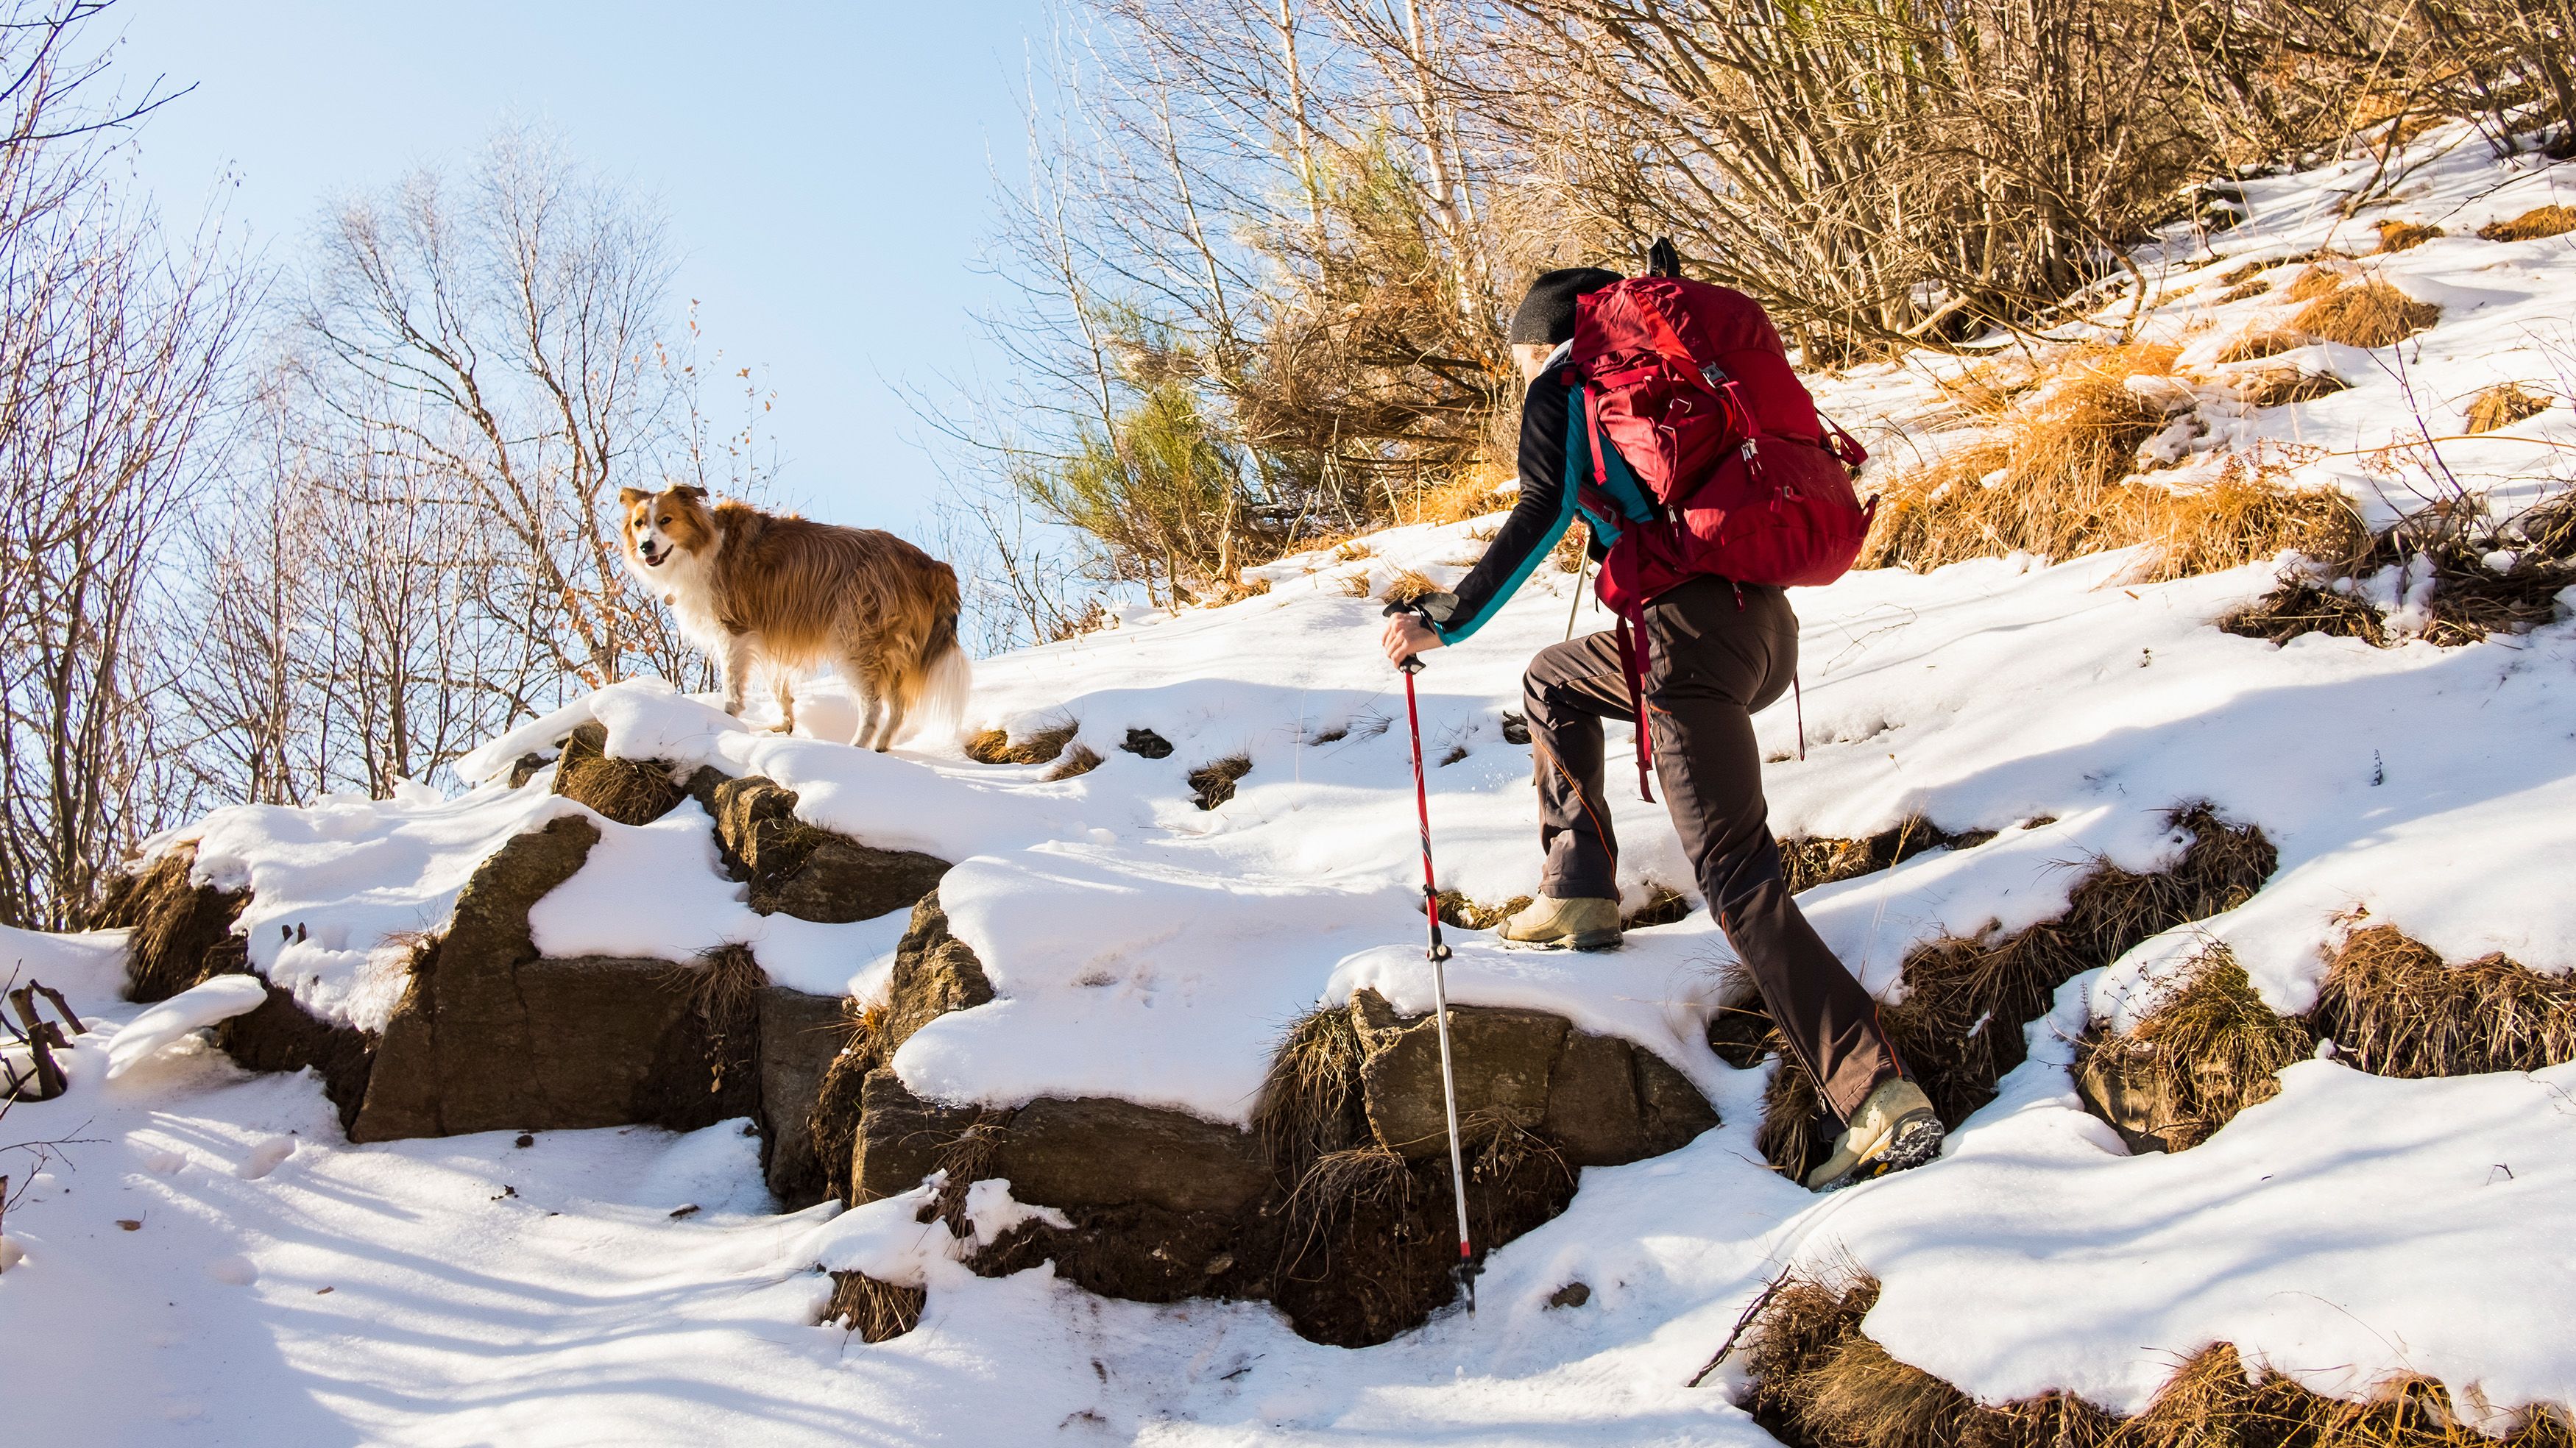 Essential Winter Hiking Gear So You Can Hike All Year Round